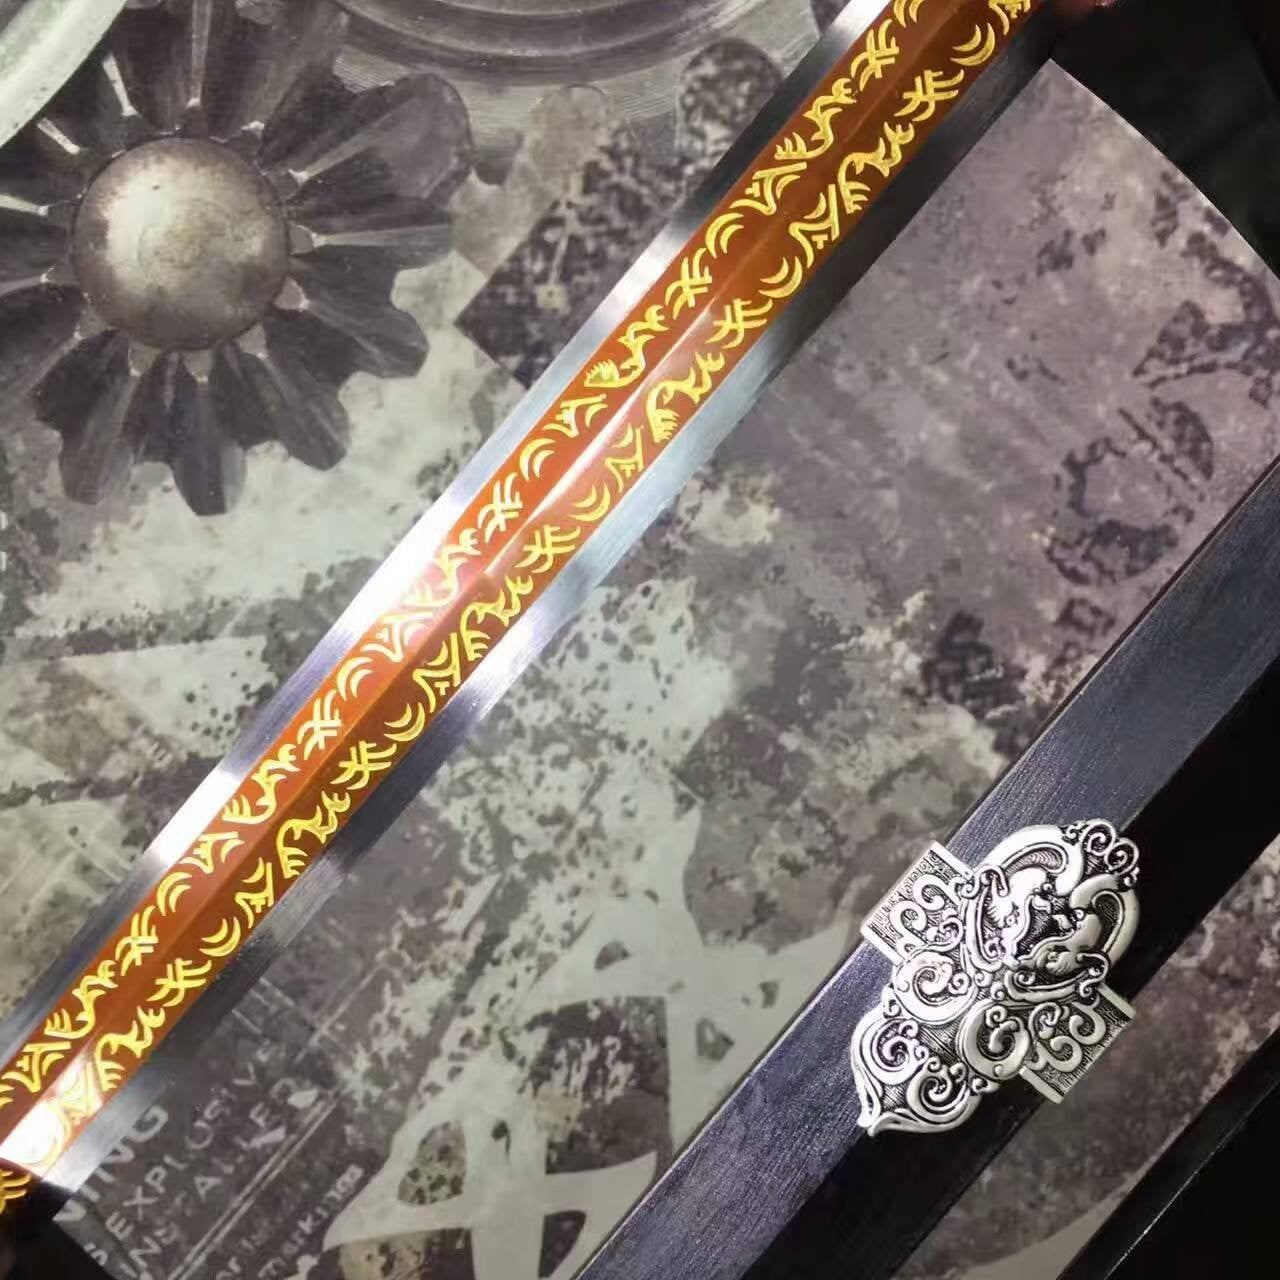 Han sword/High carbon steel eight surface blade/ Alloy fittings/Length 39" - Chinese sword shop